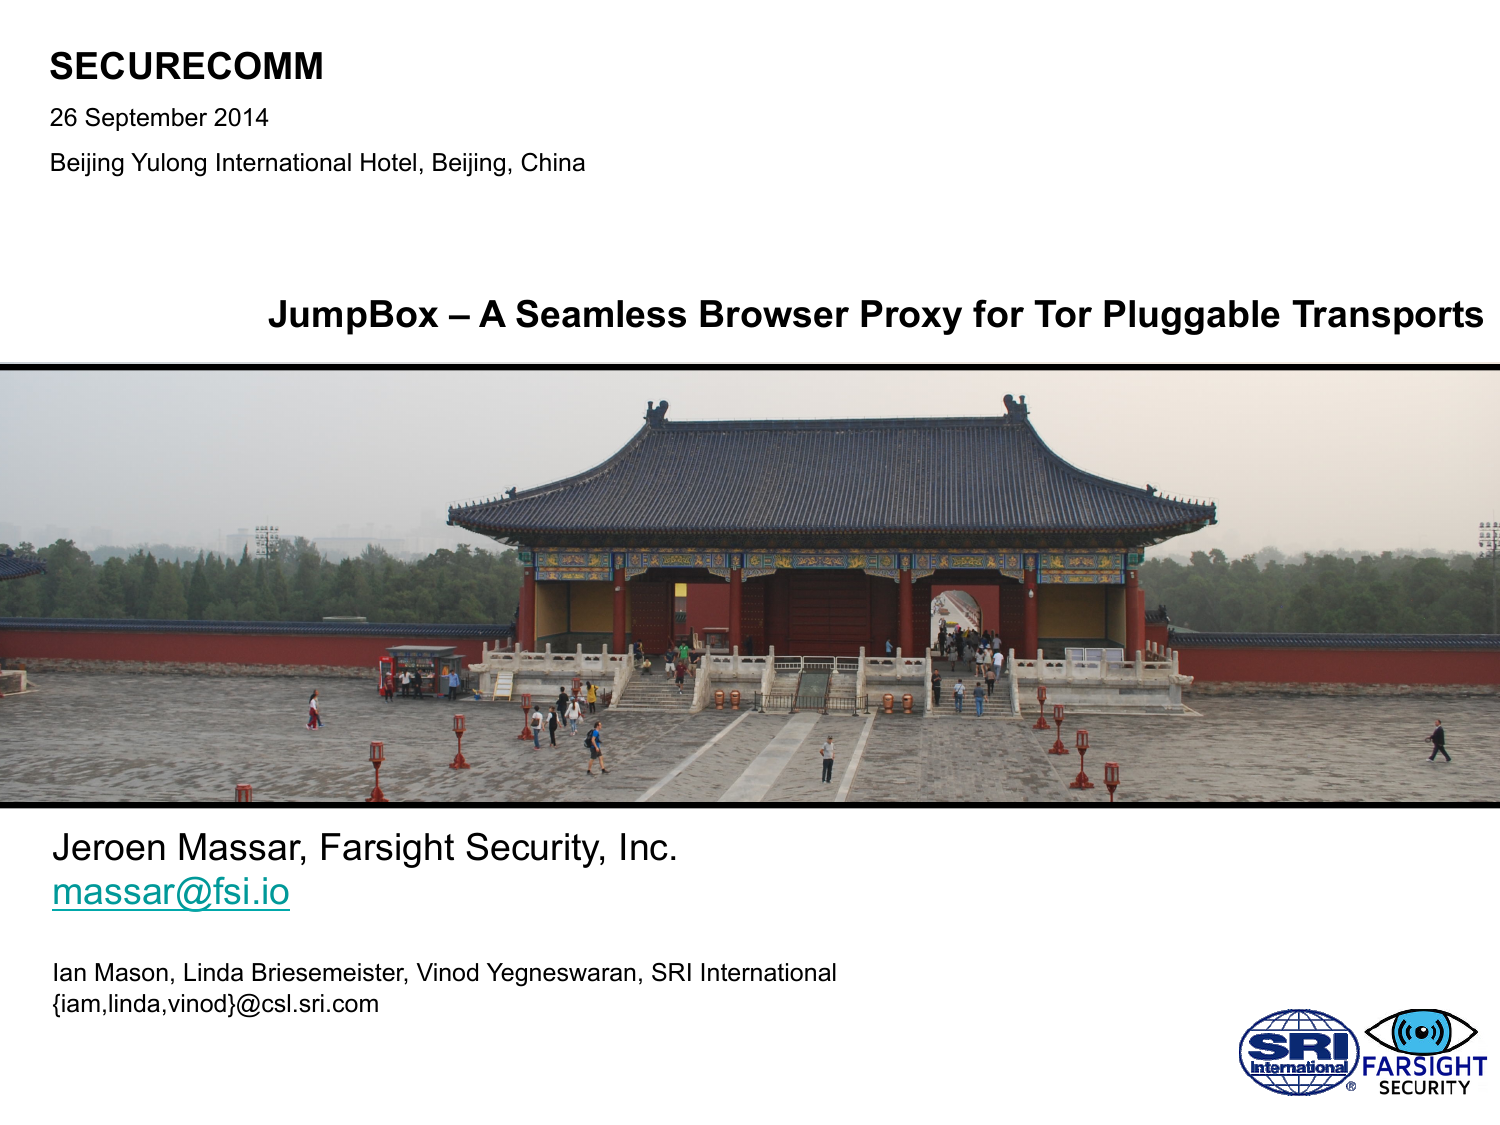 JumpBox – A Seamless Browser Proxy for Tor Pluggable Transports First Slide Image